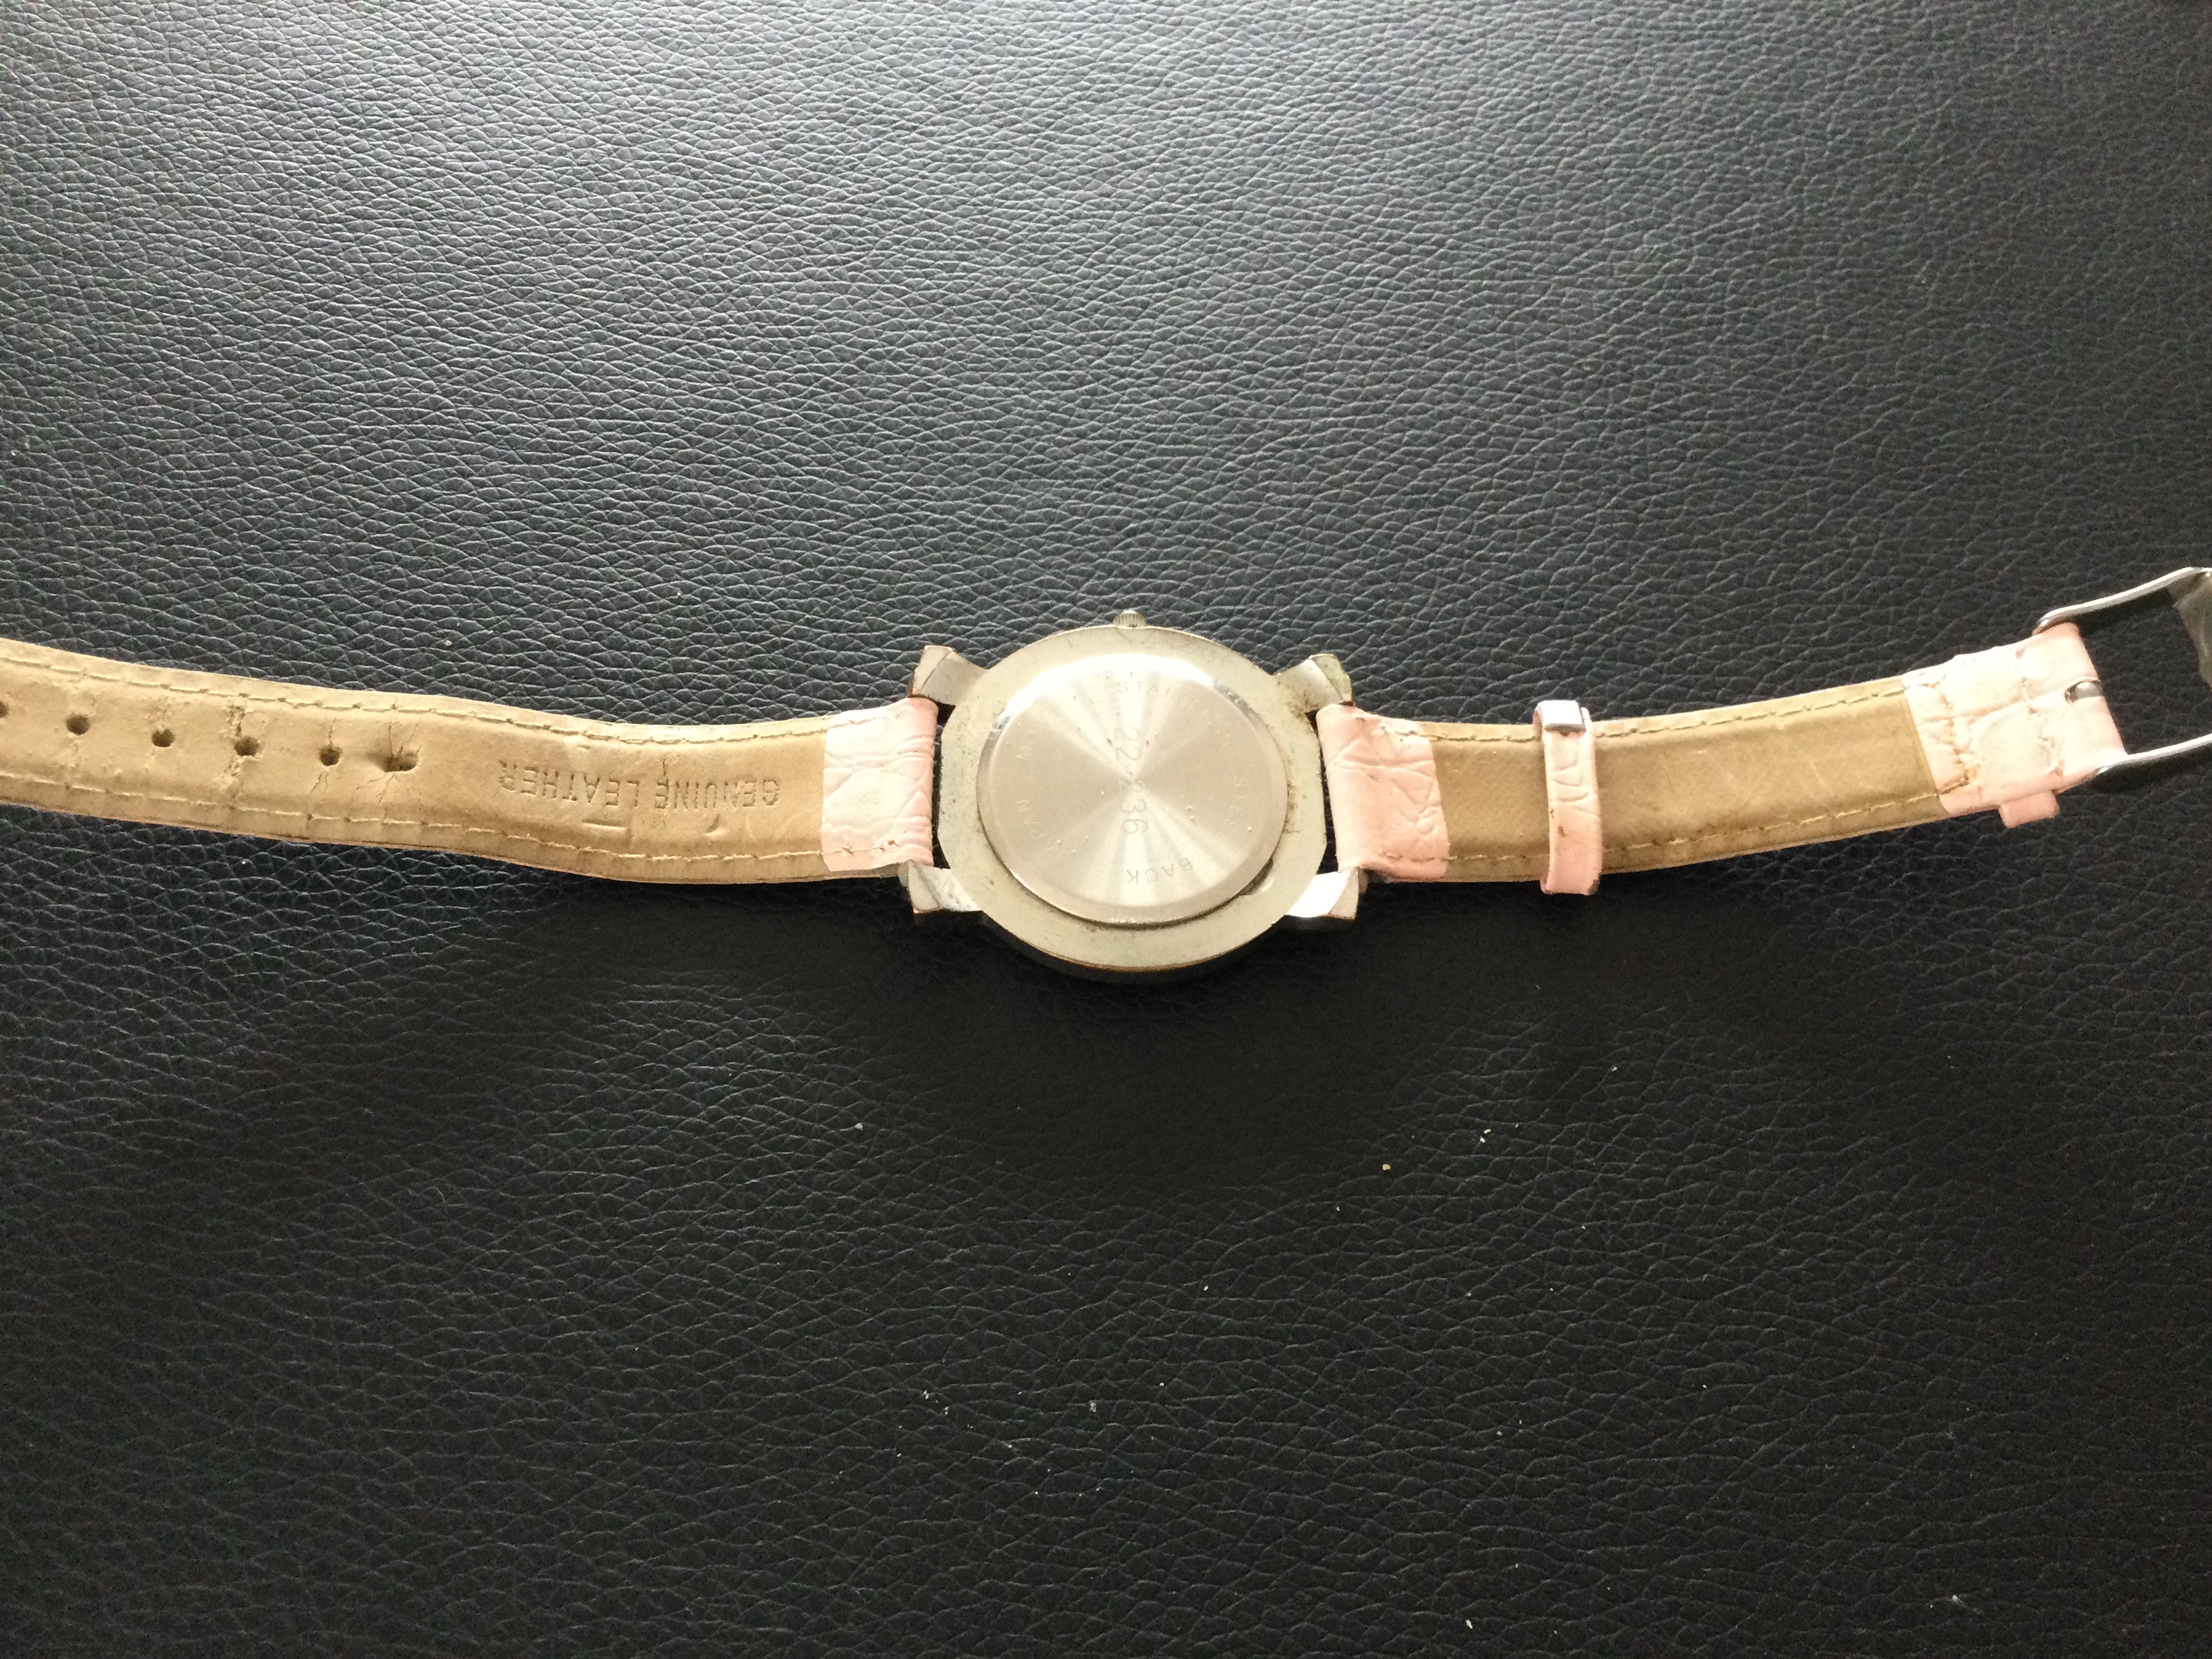 Lovely Crystal Marcel Drucker with Pink Leather Strap (GS 130) From the beautiful Marcel Drucker - Image 2 of 5